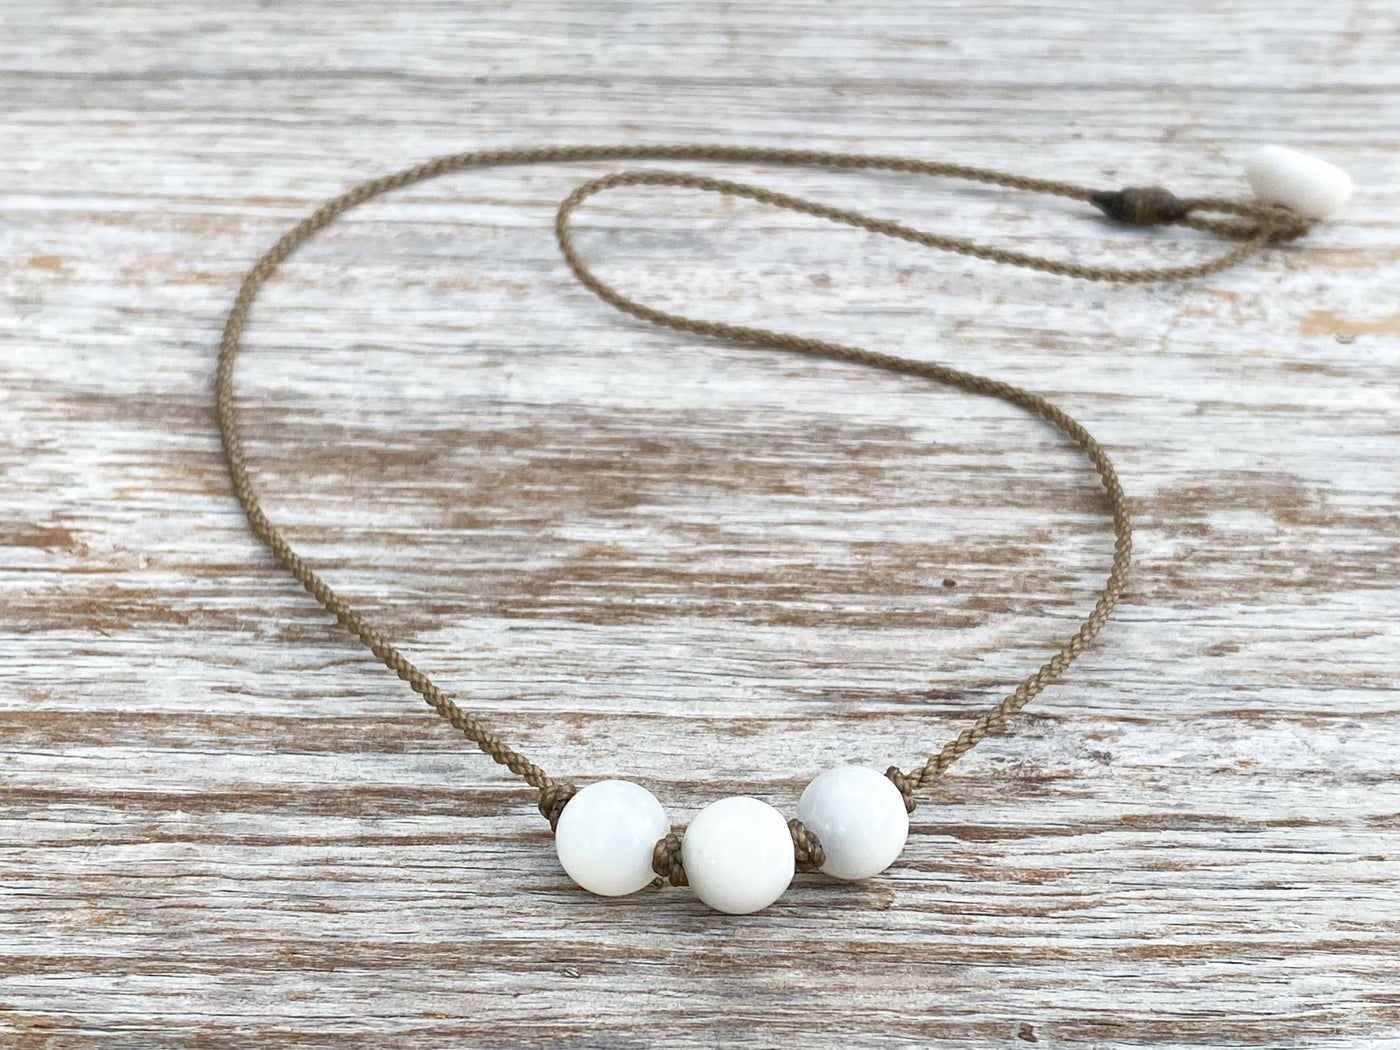 Triple Knotted Necklace-0077-White Mother of Pearl Round Medium